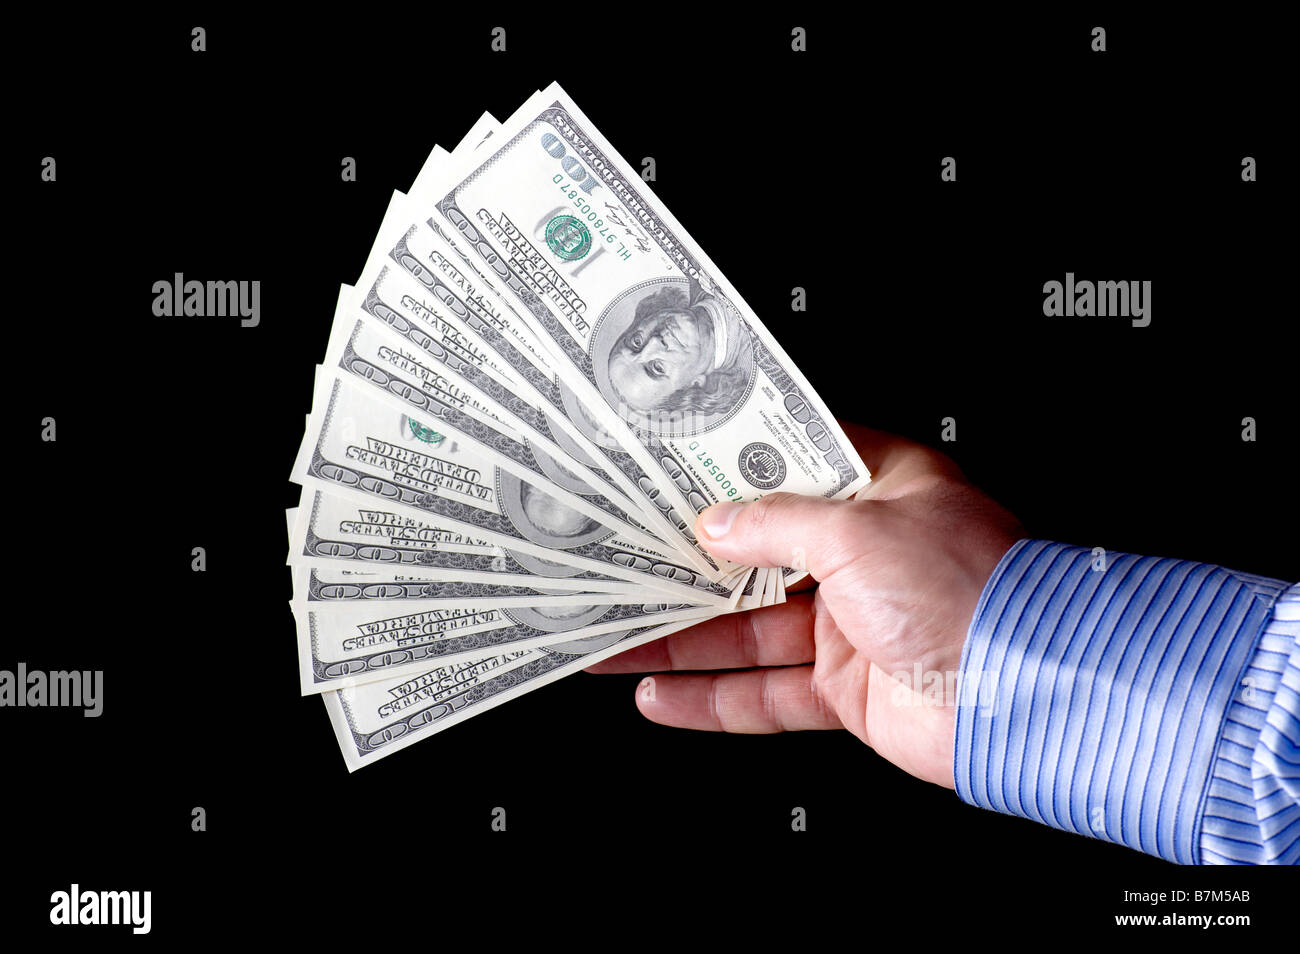 object on black currency banknote closeup Stock Photo